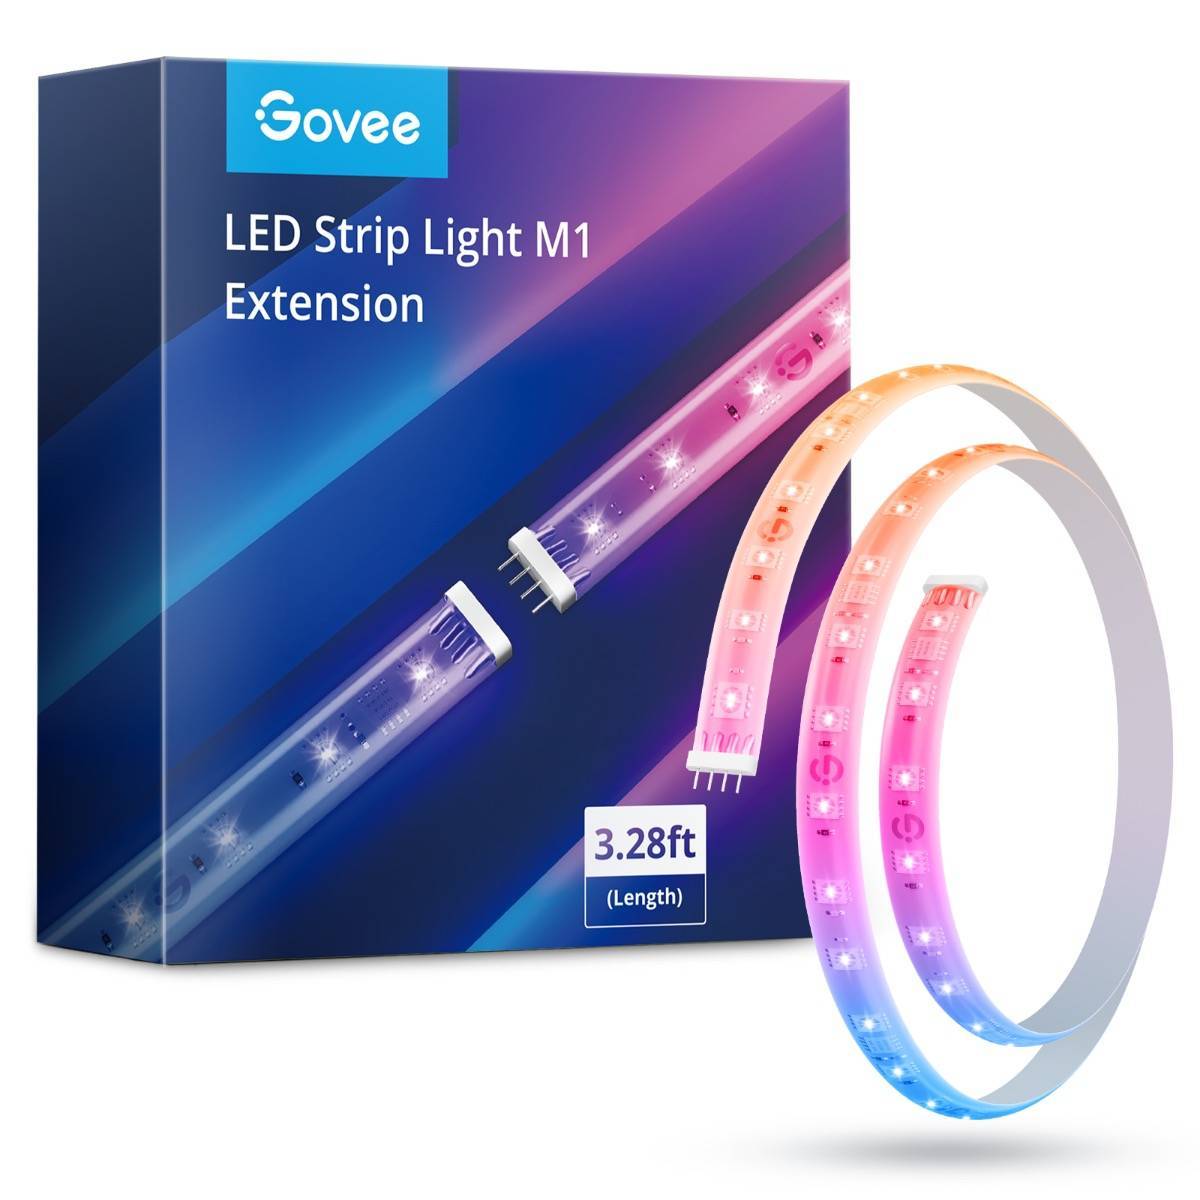 https://cablesformac.com/61625-thickbox_default/govee-rgbicw-led-strip-lights-1m-extension-for-h61e1.jpg